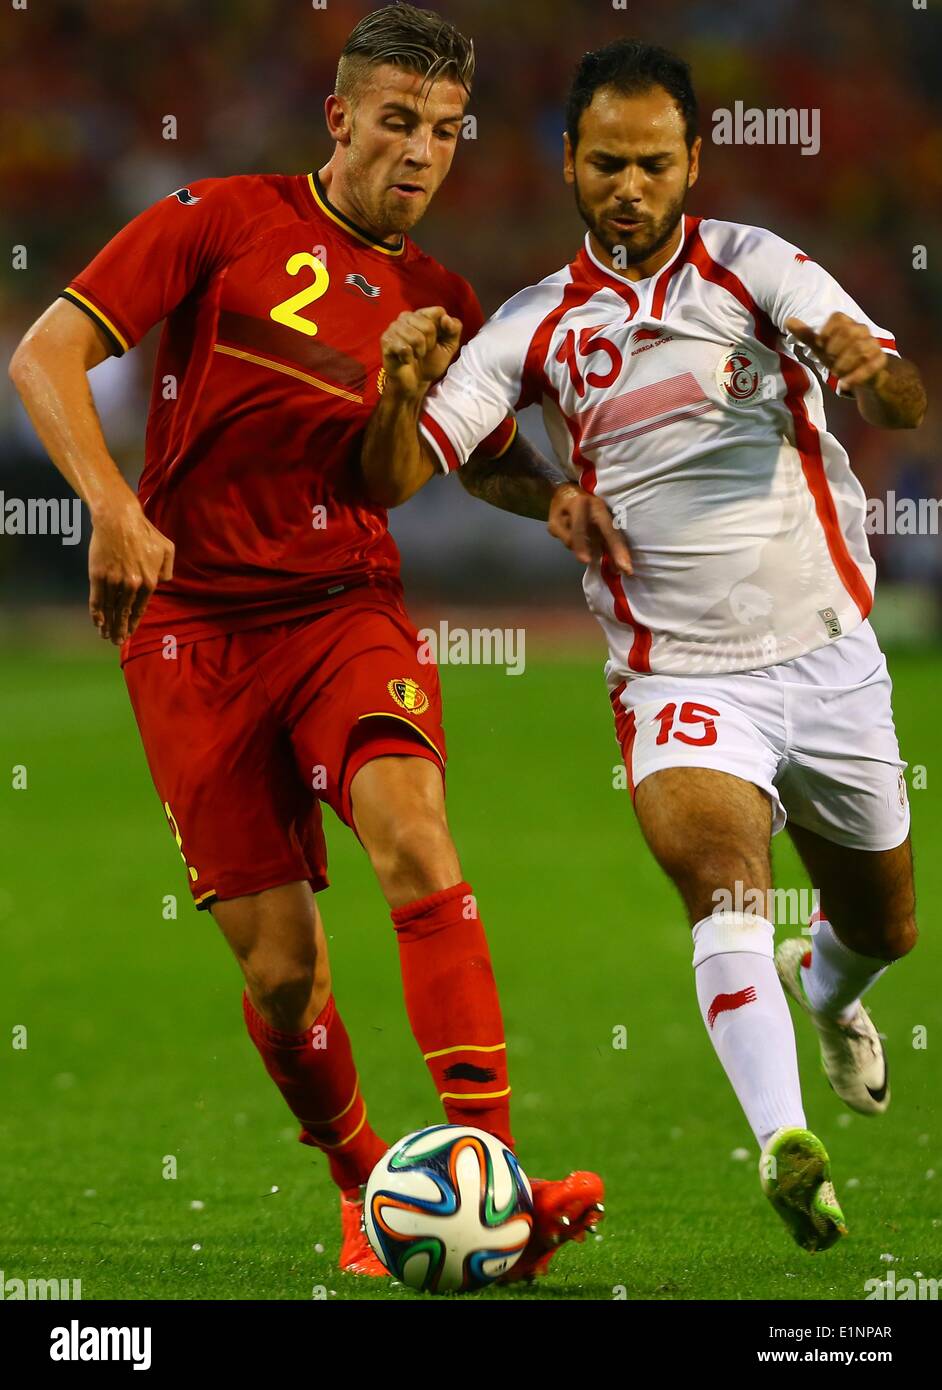 Brussels, Belgium. 7th June, 2014. Belgium's Toby Alderweireld (L) vies with Tunisia's Zouhaier Dhaouadi during a friendly soccer match in Brussels, on June 7, 2014. Belgium won 1-0. Credit:  Gong Bing/Xinhua/Alamy Live News Stock Photo